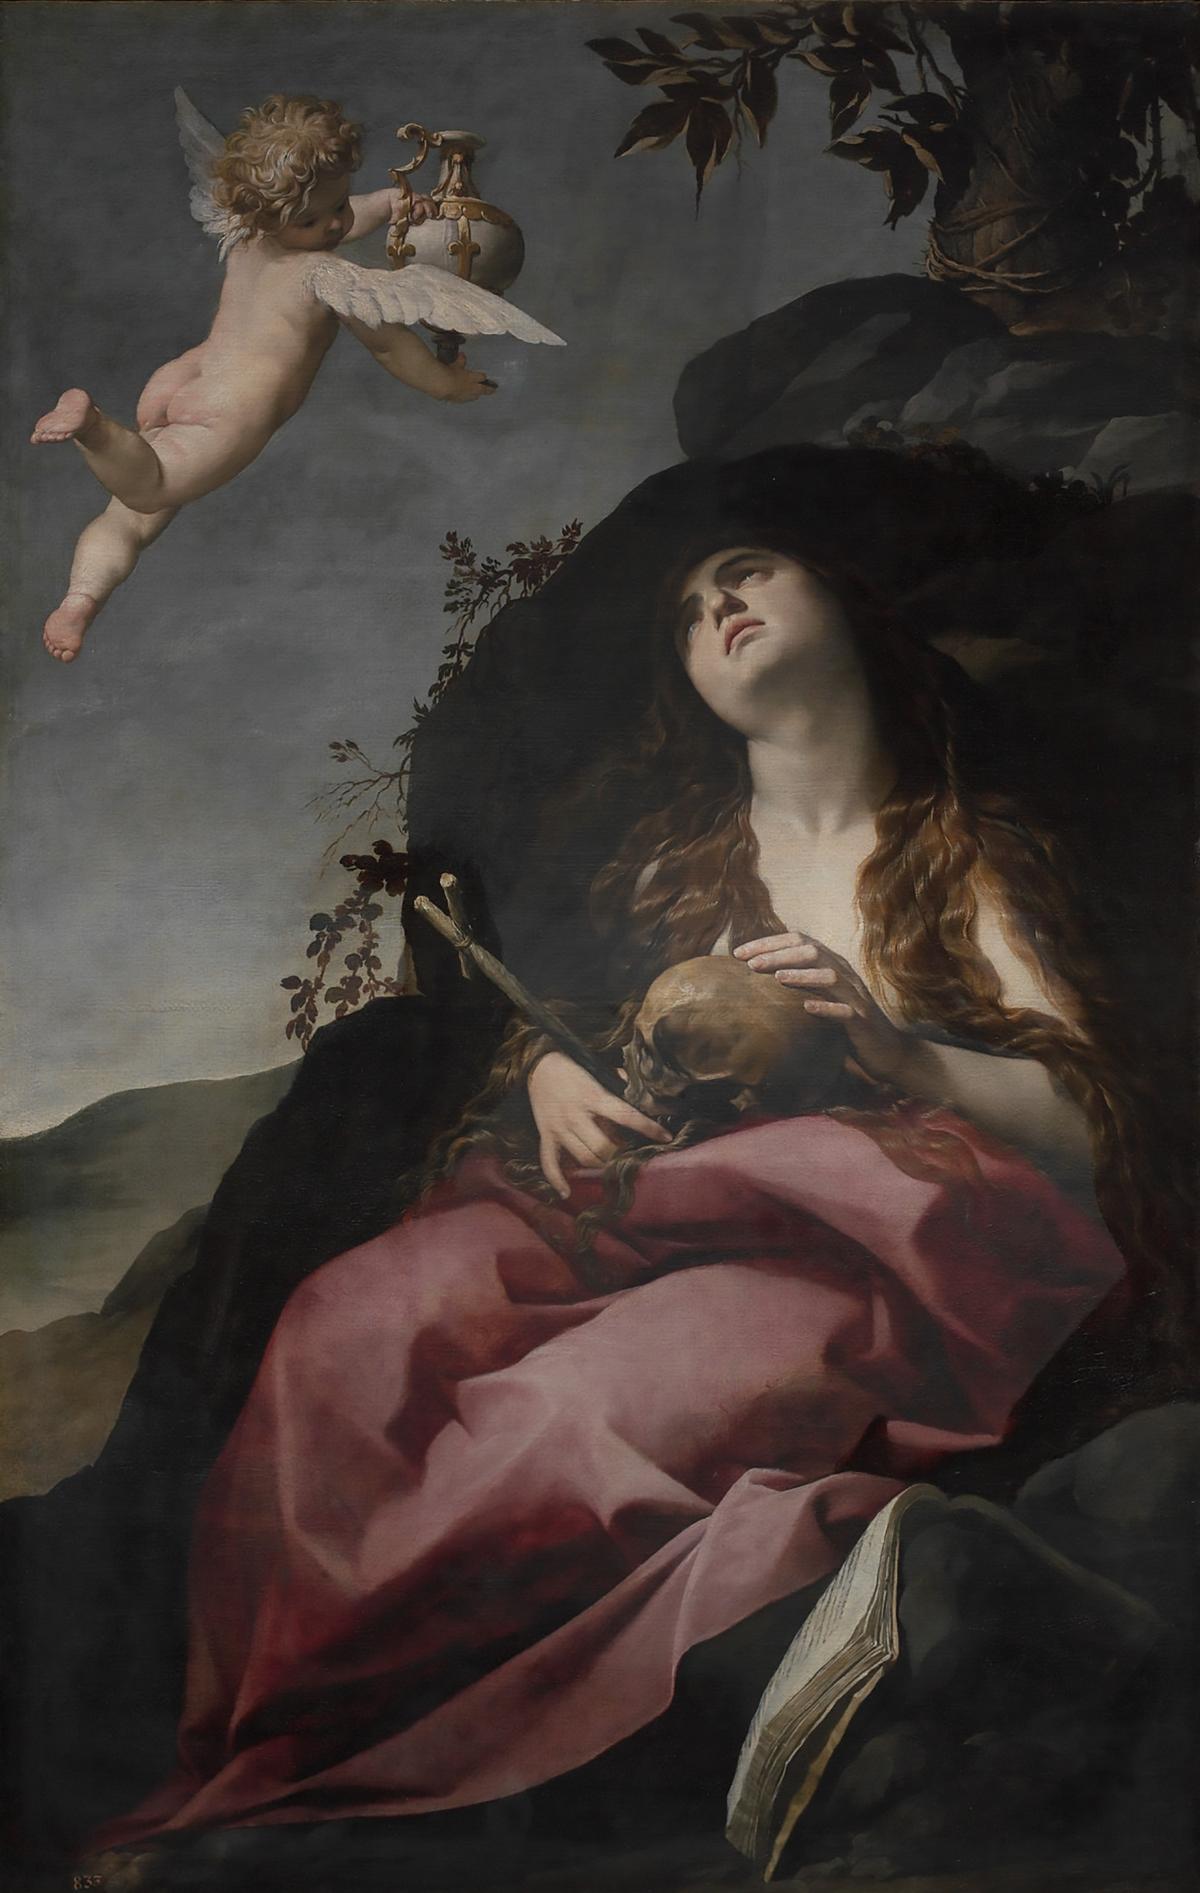 "Penitent Magdalene" by an unknown 17th-century artist. Oil on canvas. Prado Museum, Madrid. (Public Domain)